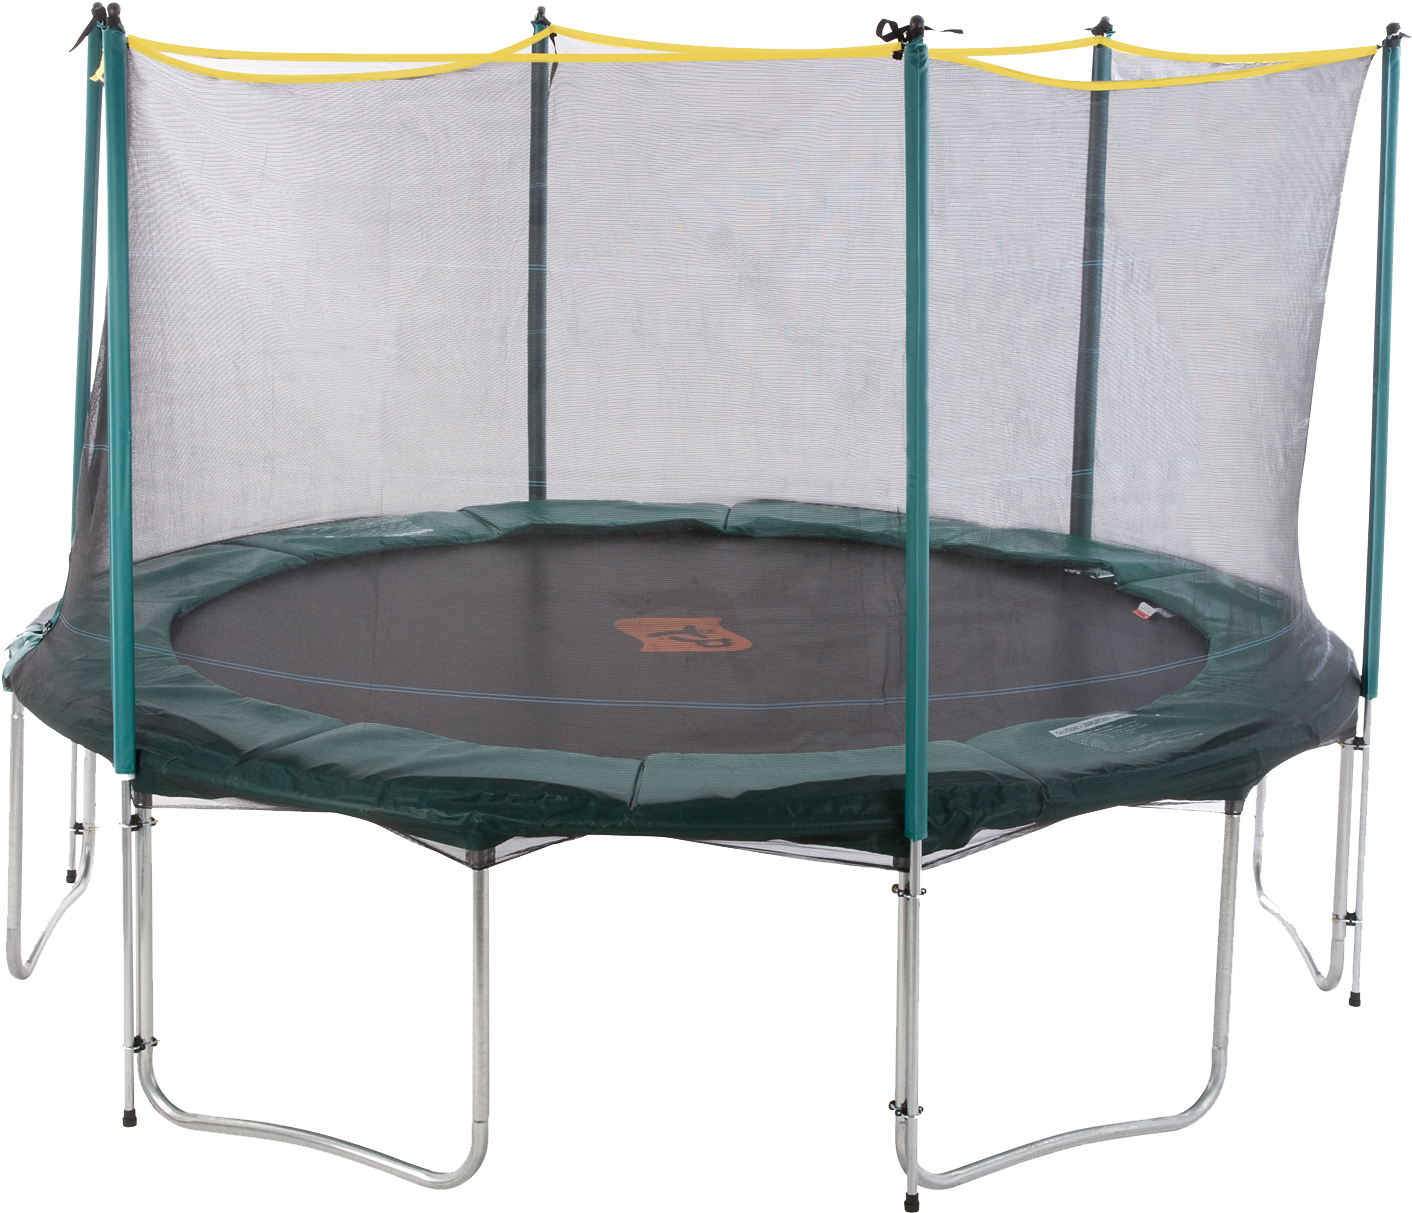 Round Outdoor Trampoline With Safety Net PNG